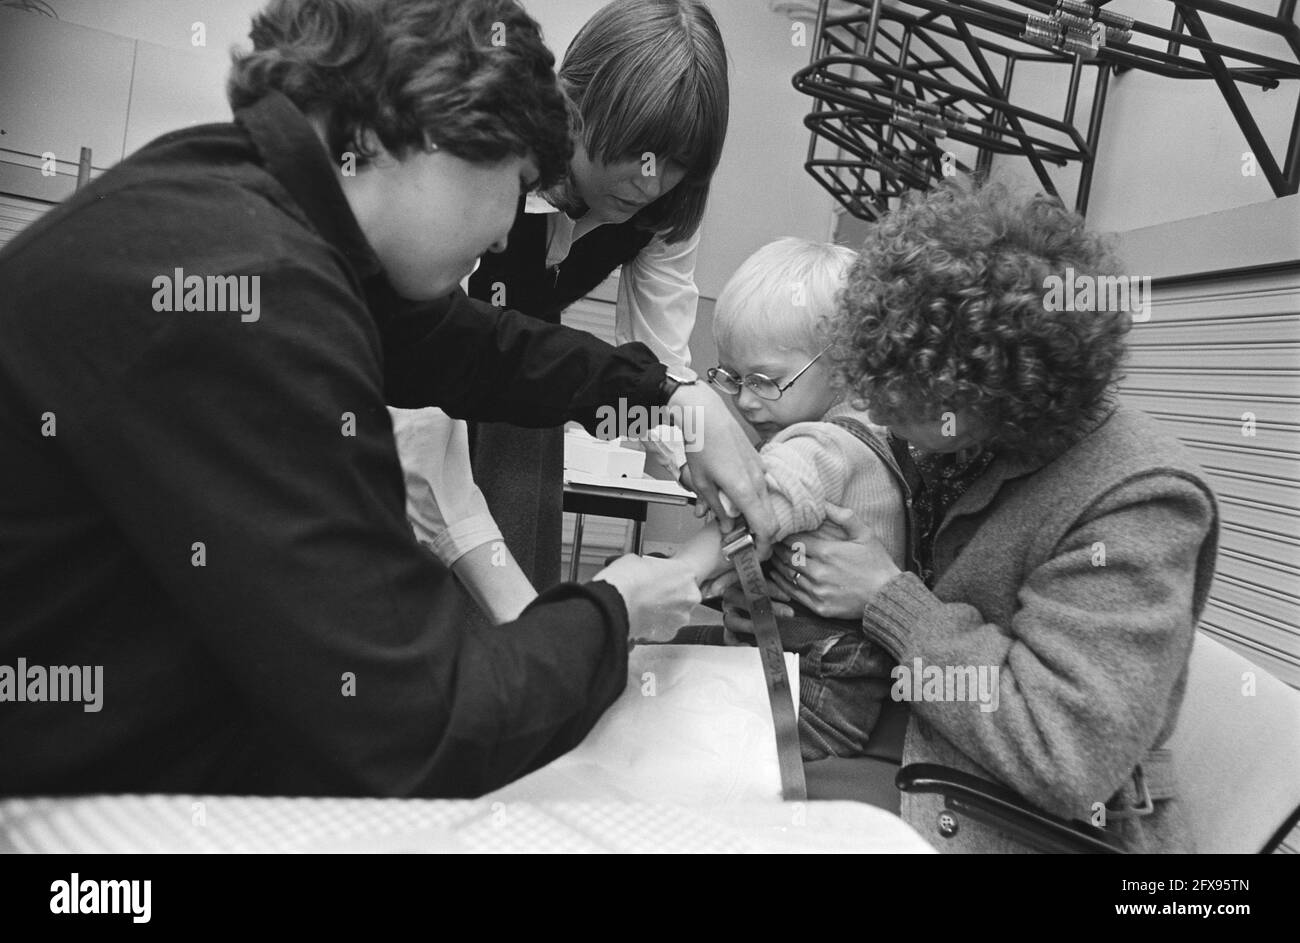 Blood test on preschoolers living or attending school near lead white factory Hondorff, preschooler receives shot for blood test, March 24, 1981, KLEUTERS, blood tests, The Netherlands, 20th century press agency photo, news to remember, documentary, historic photography 1945-1990, visual stories, human history of the Twentieth Century, capturing moments in time Stock Photo